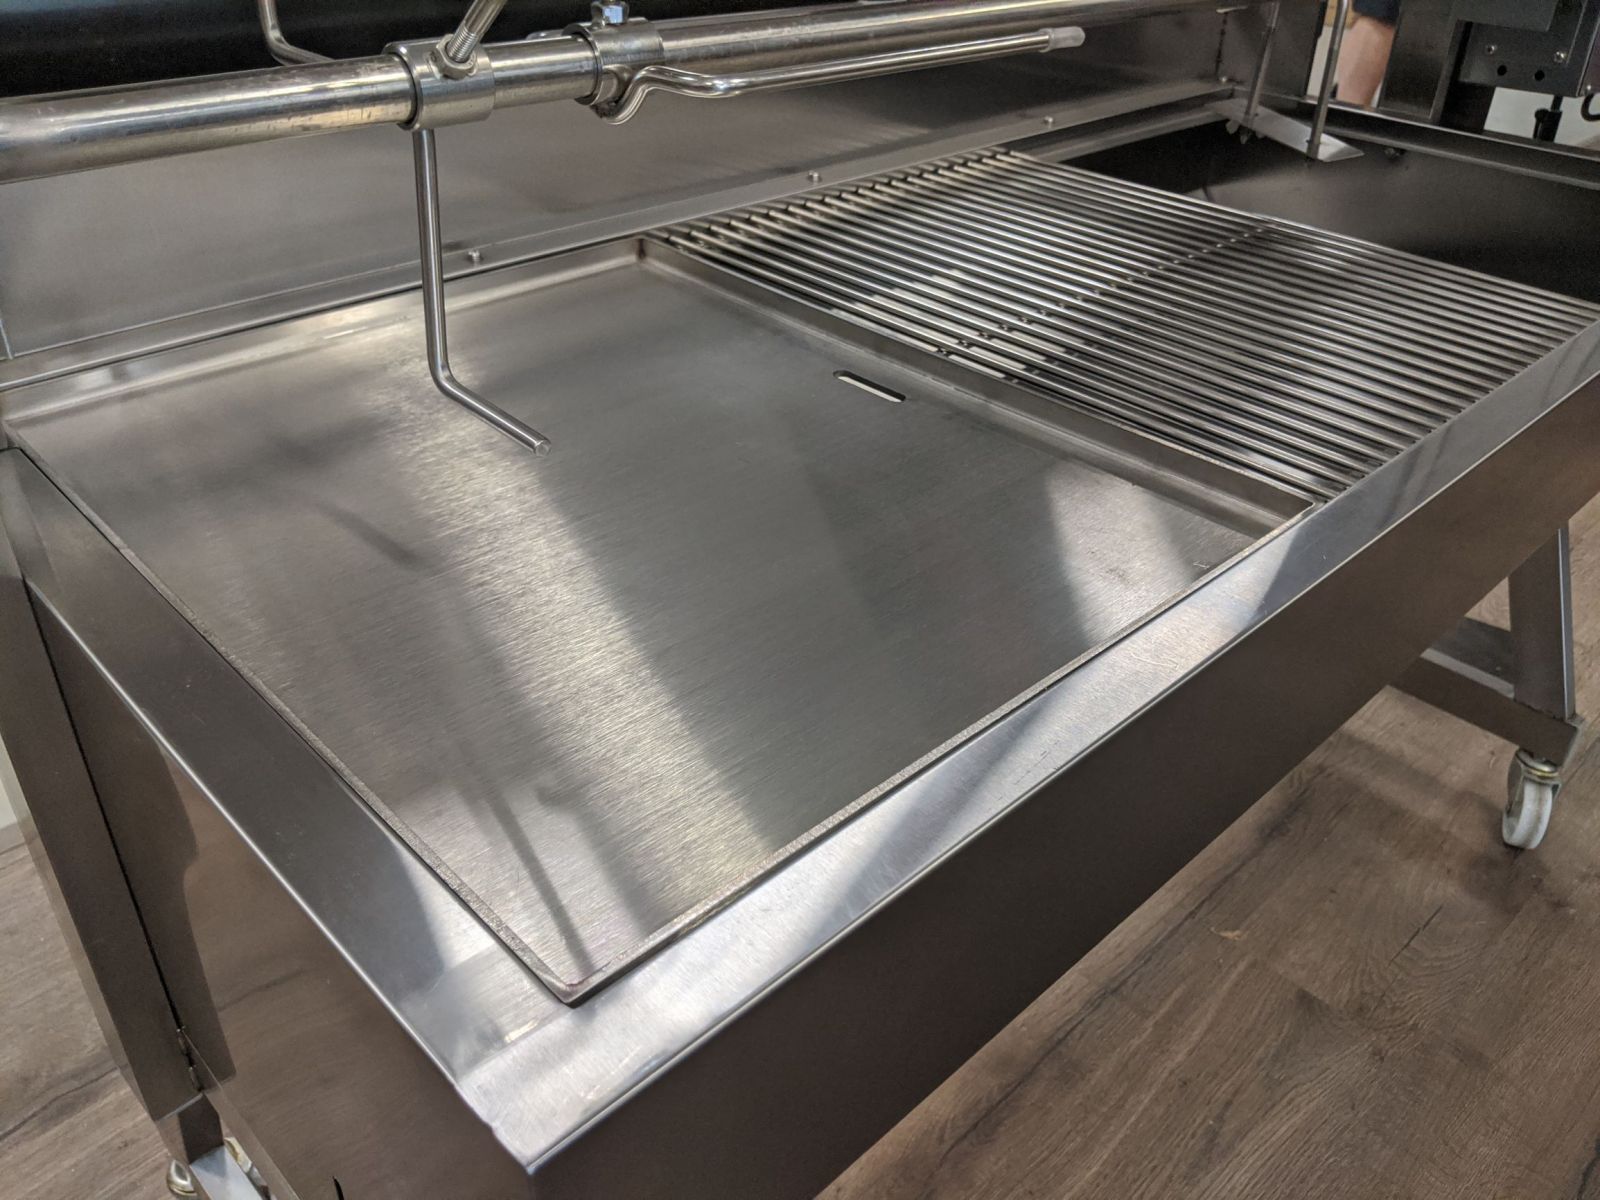 Image of the stainless steel BBQ Hotplate that has replaced grills in a bbq